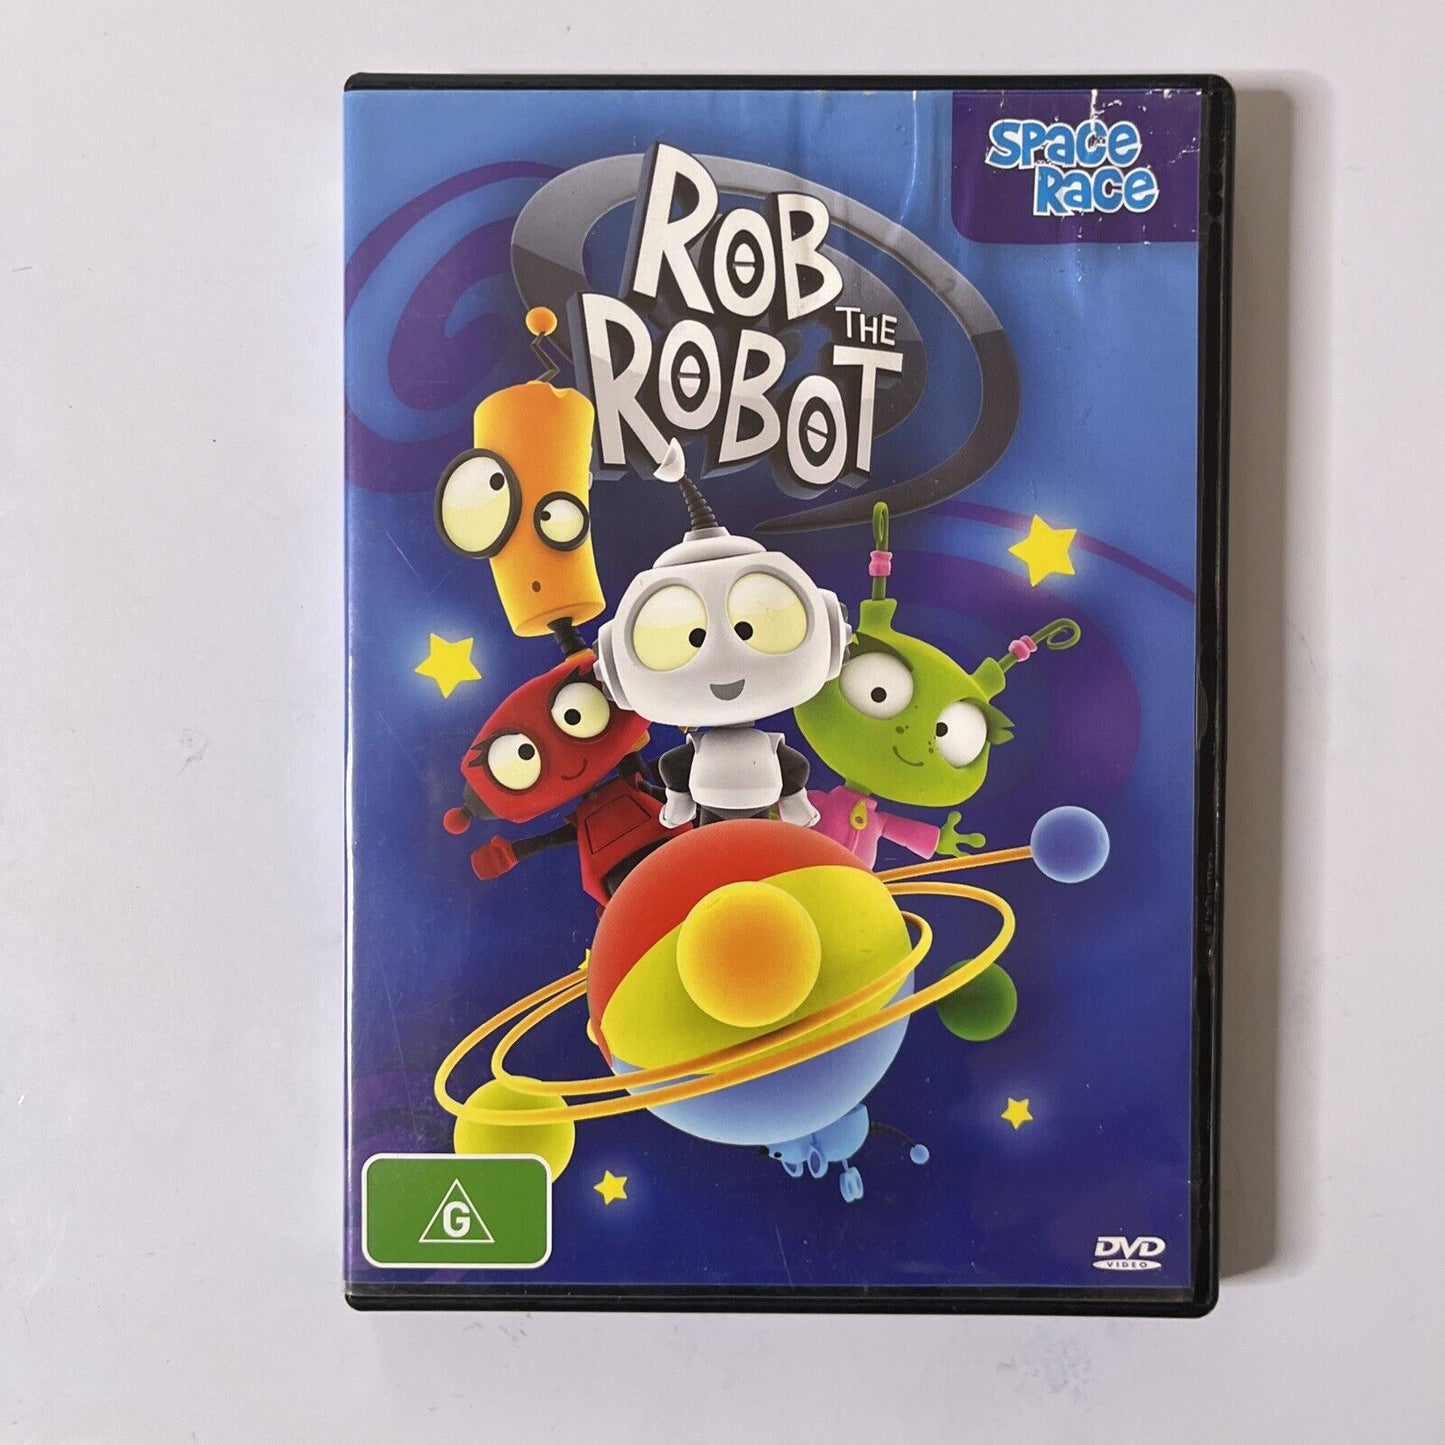 Rob The Robot - Space Race (DVD, 2011) Region 4